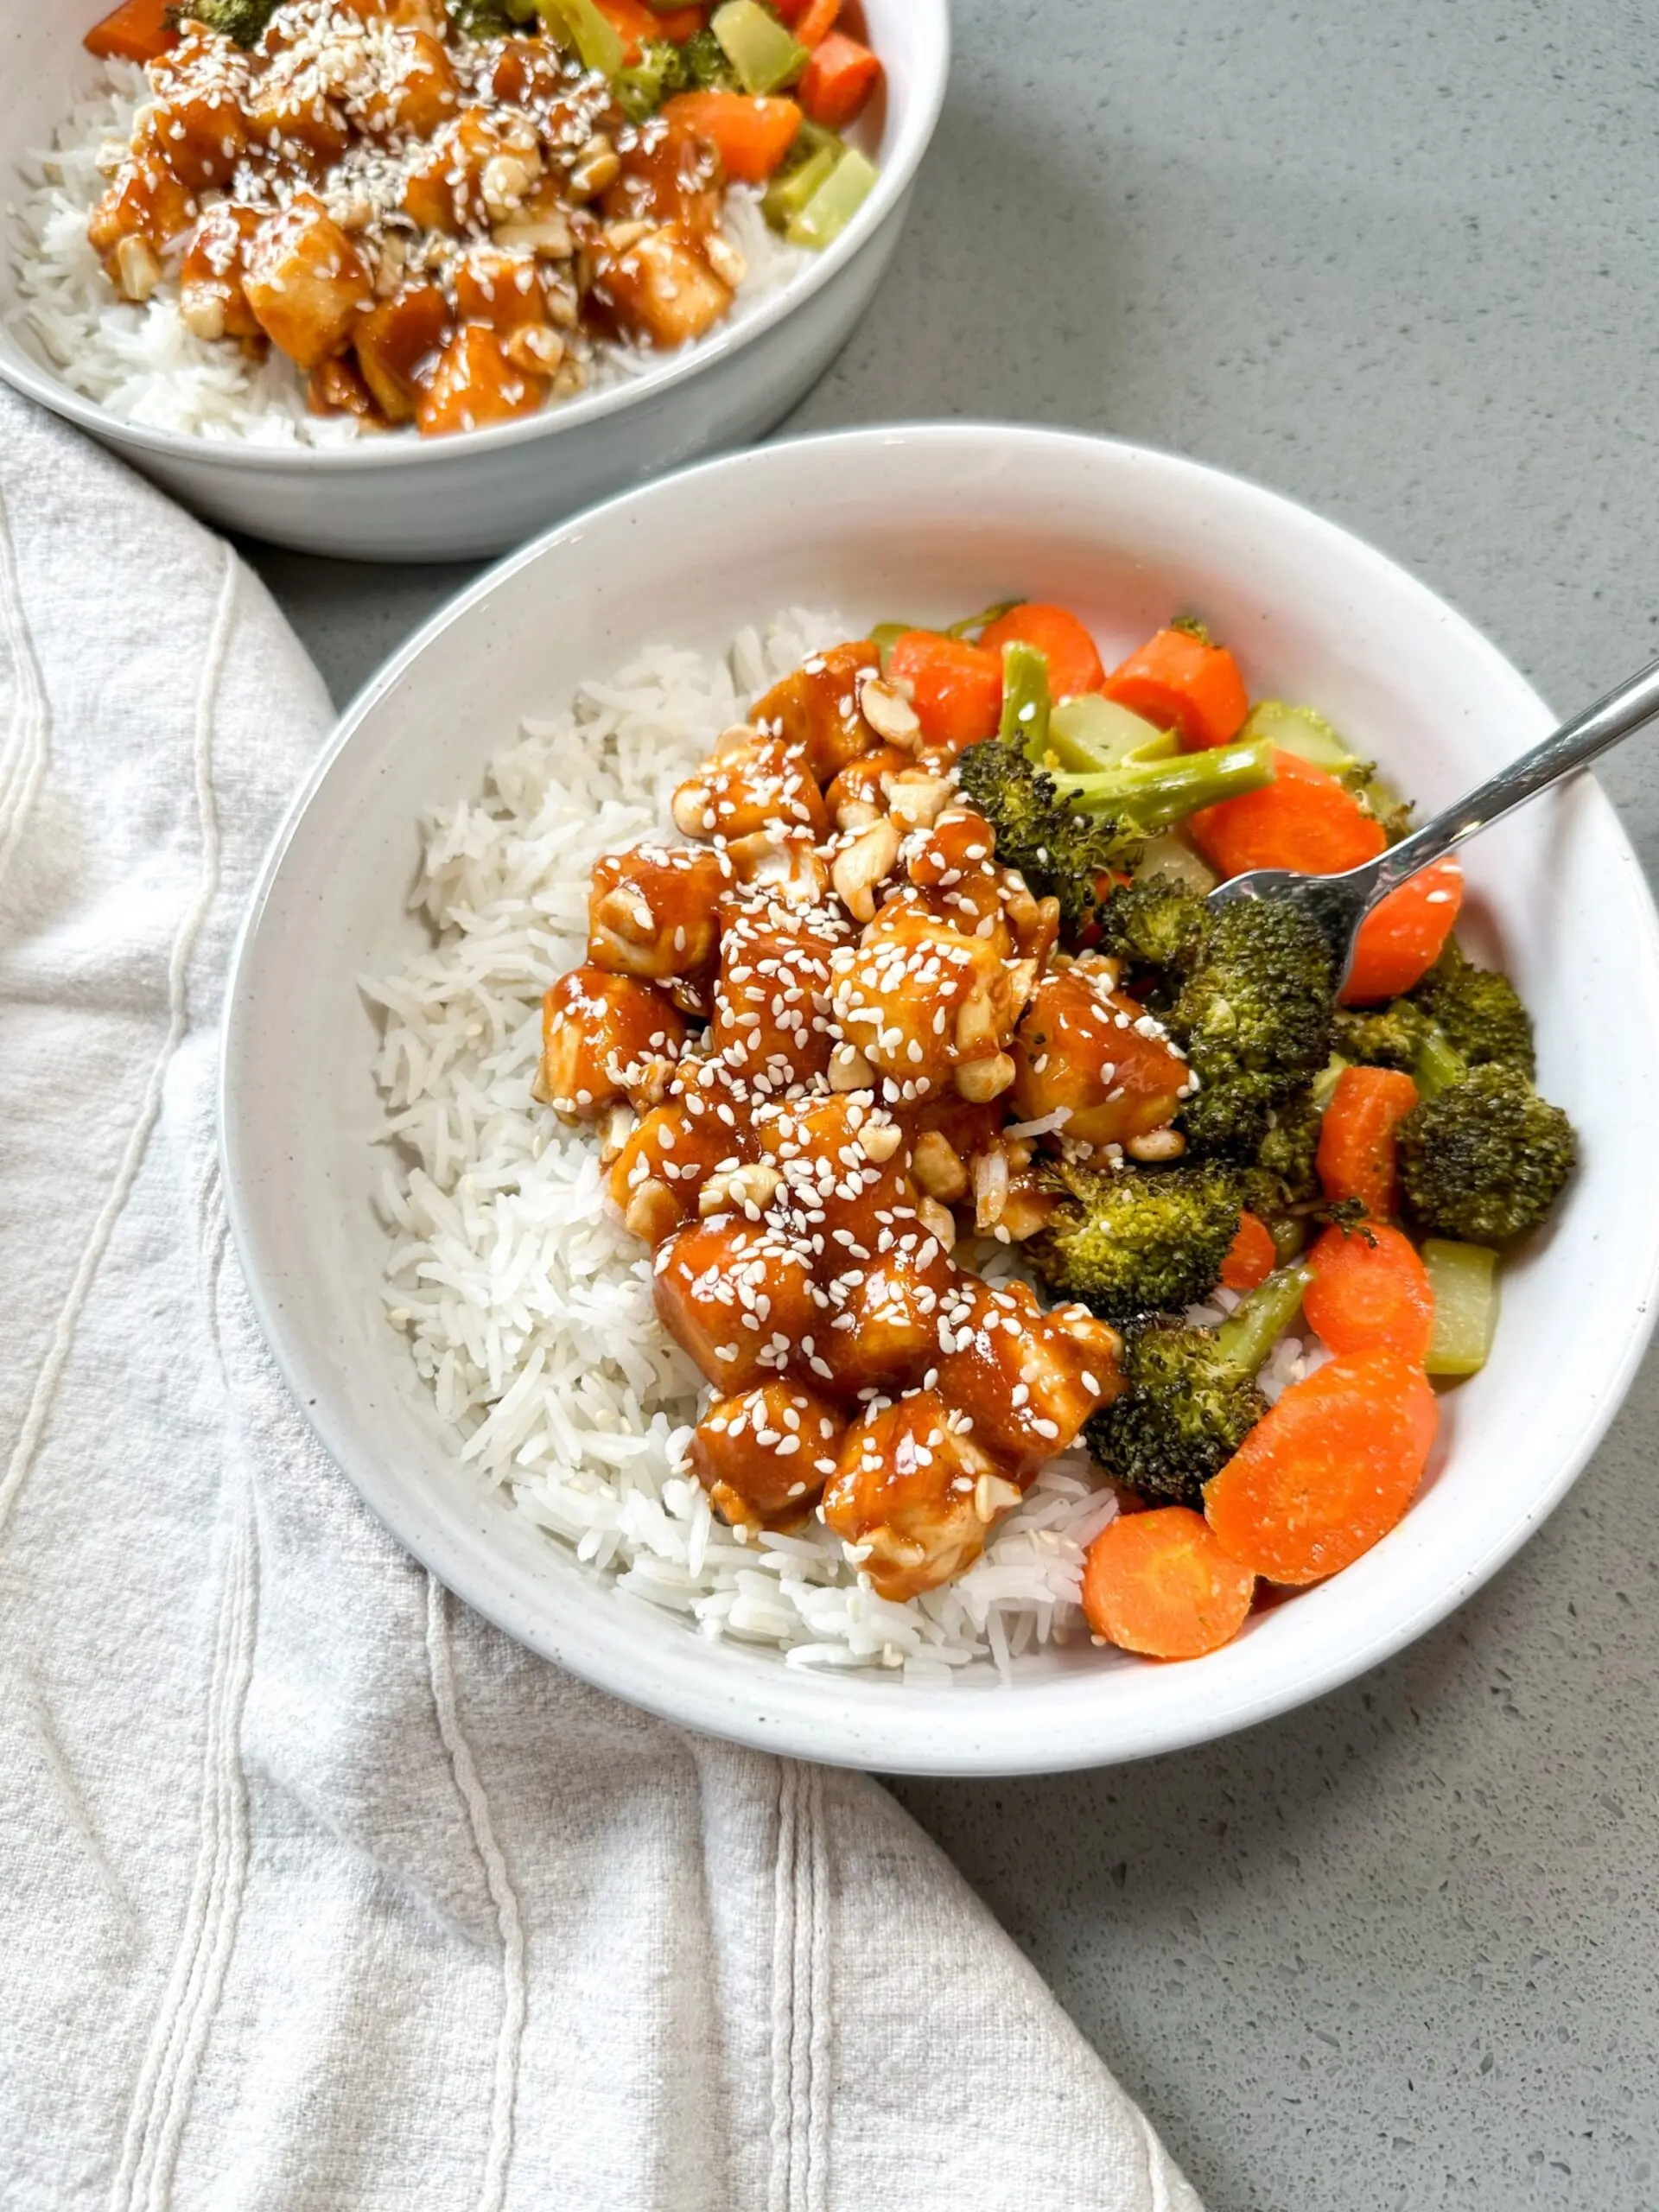 PHOTO: A tofu and veggie rice bowl from Jenn Lueke's March meal prep.